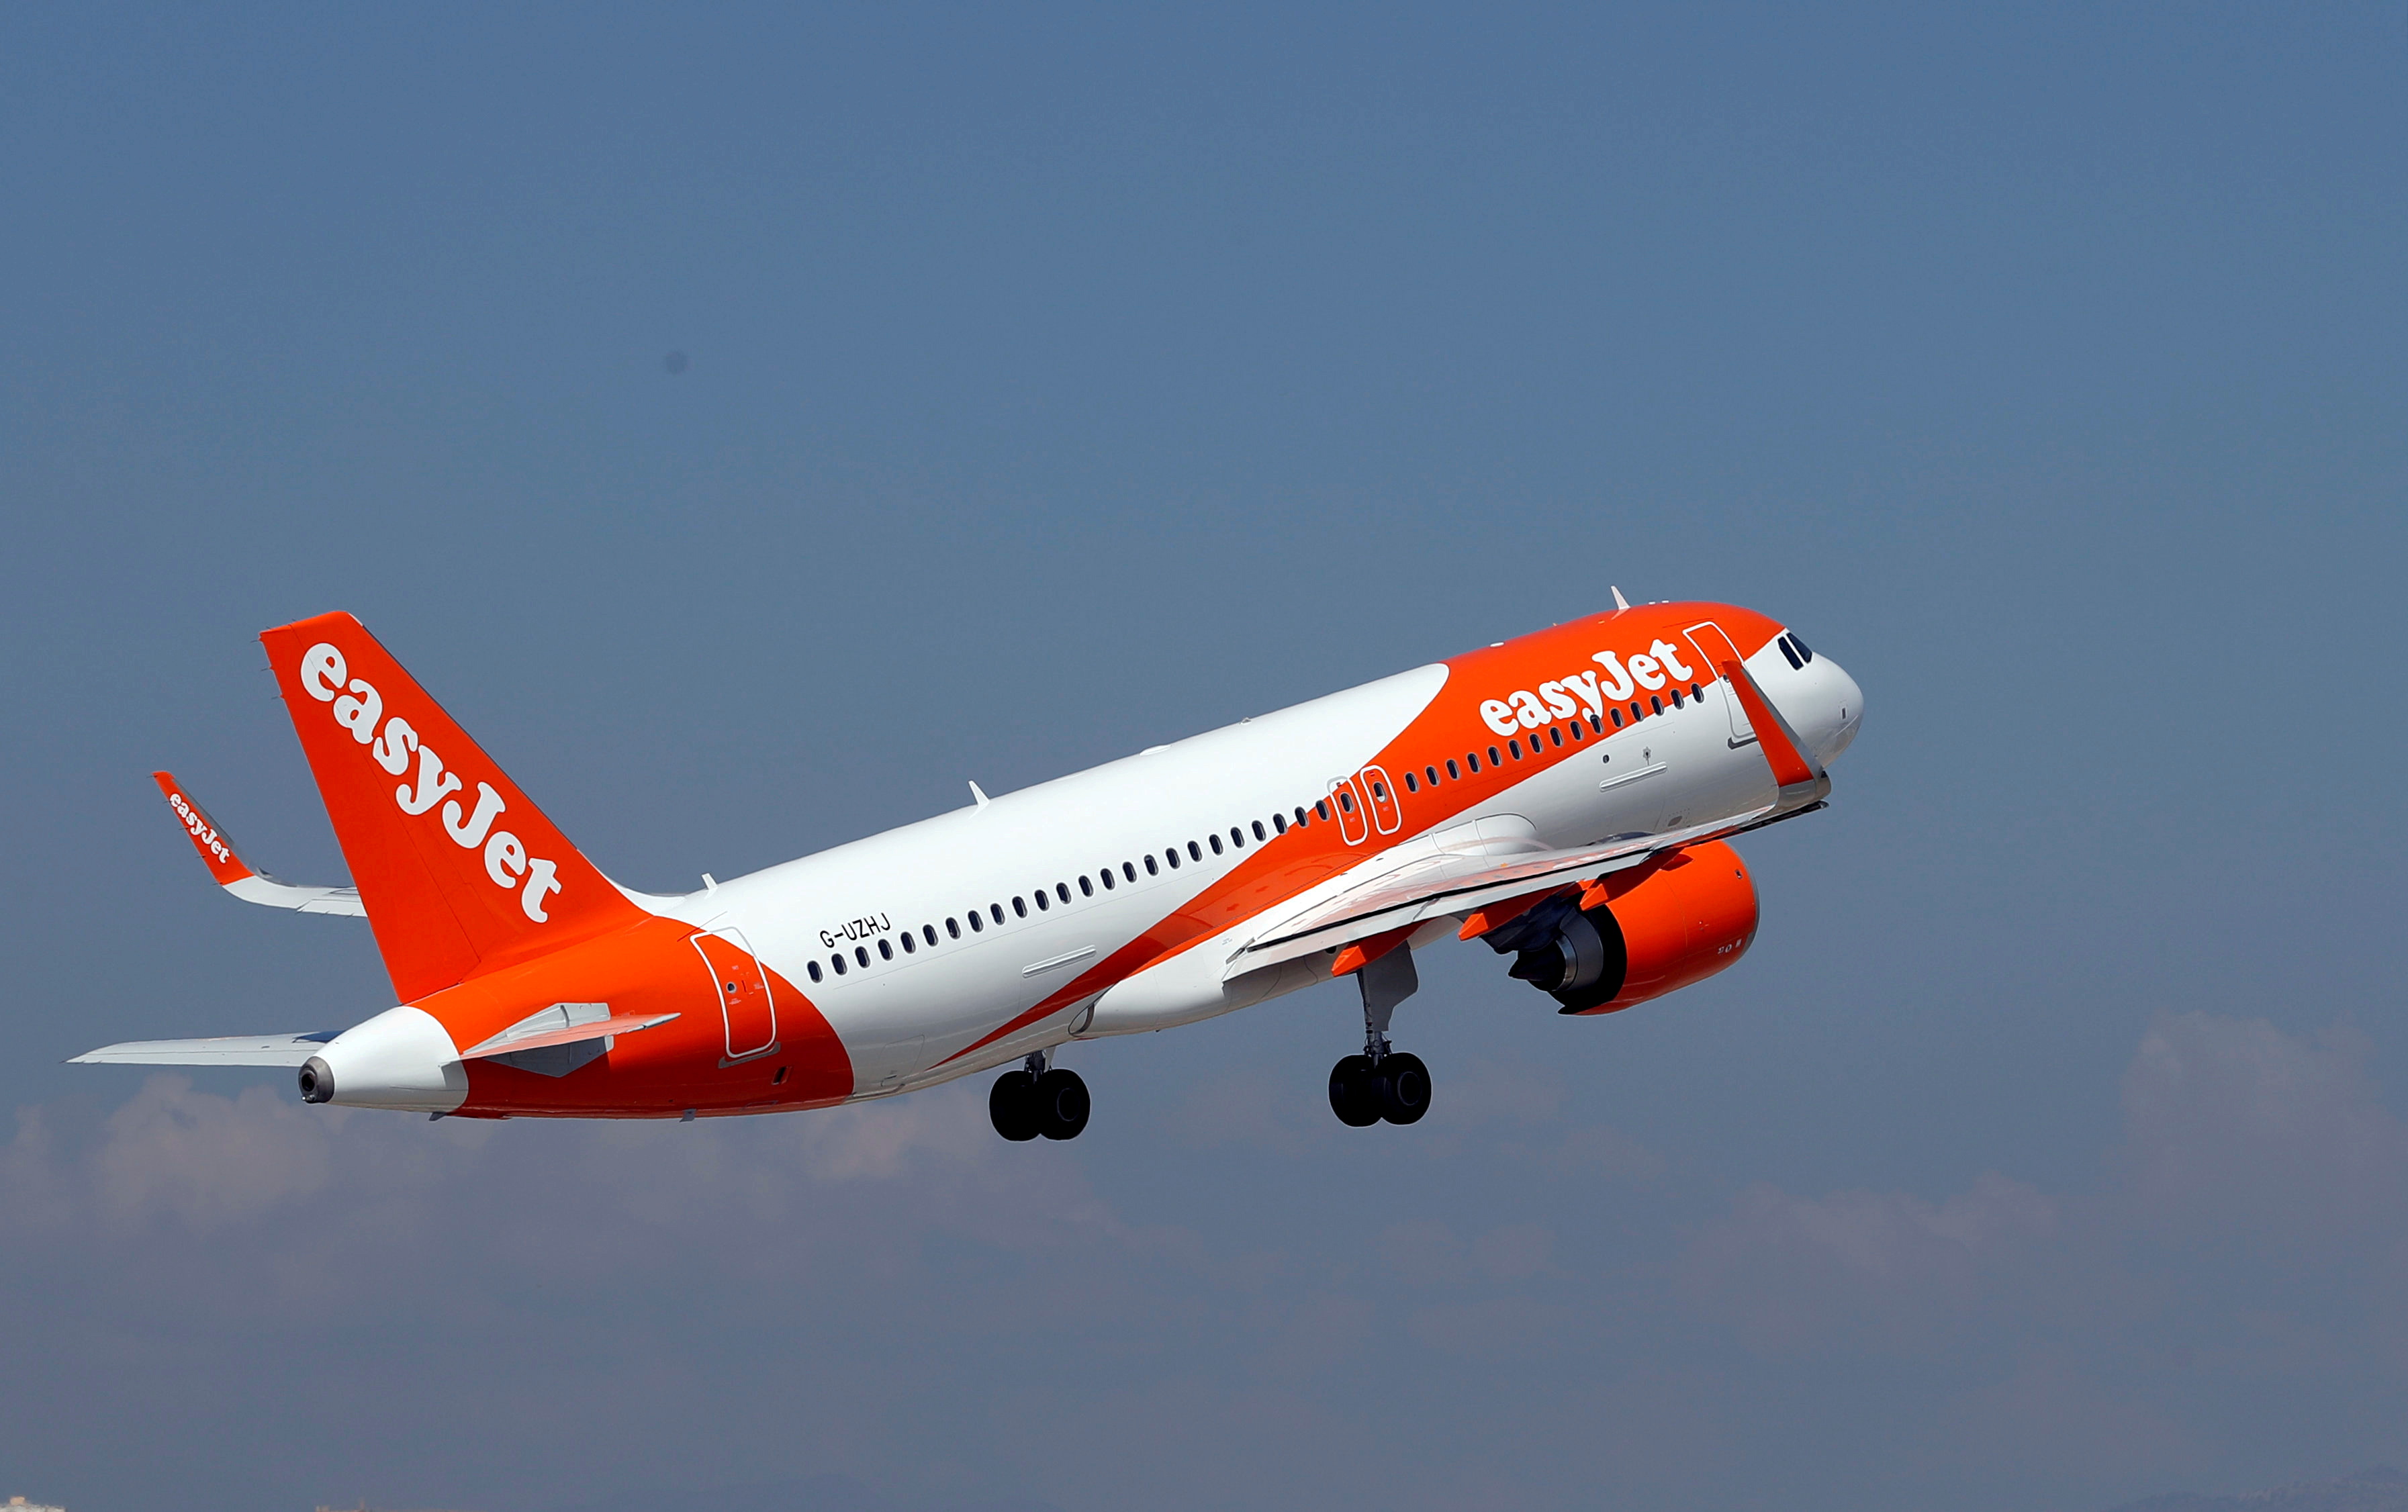 FILE PHOTO: The easyJet Airbus A320-251N takes off from Nice international airport in Nice, France